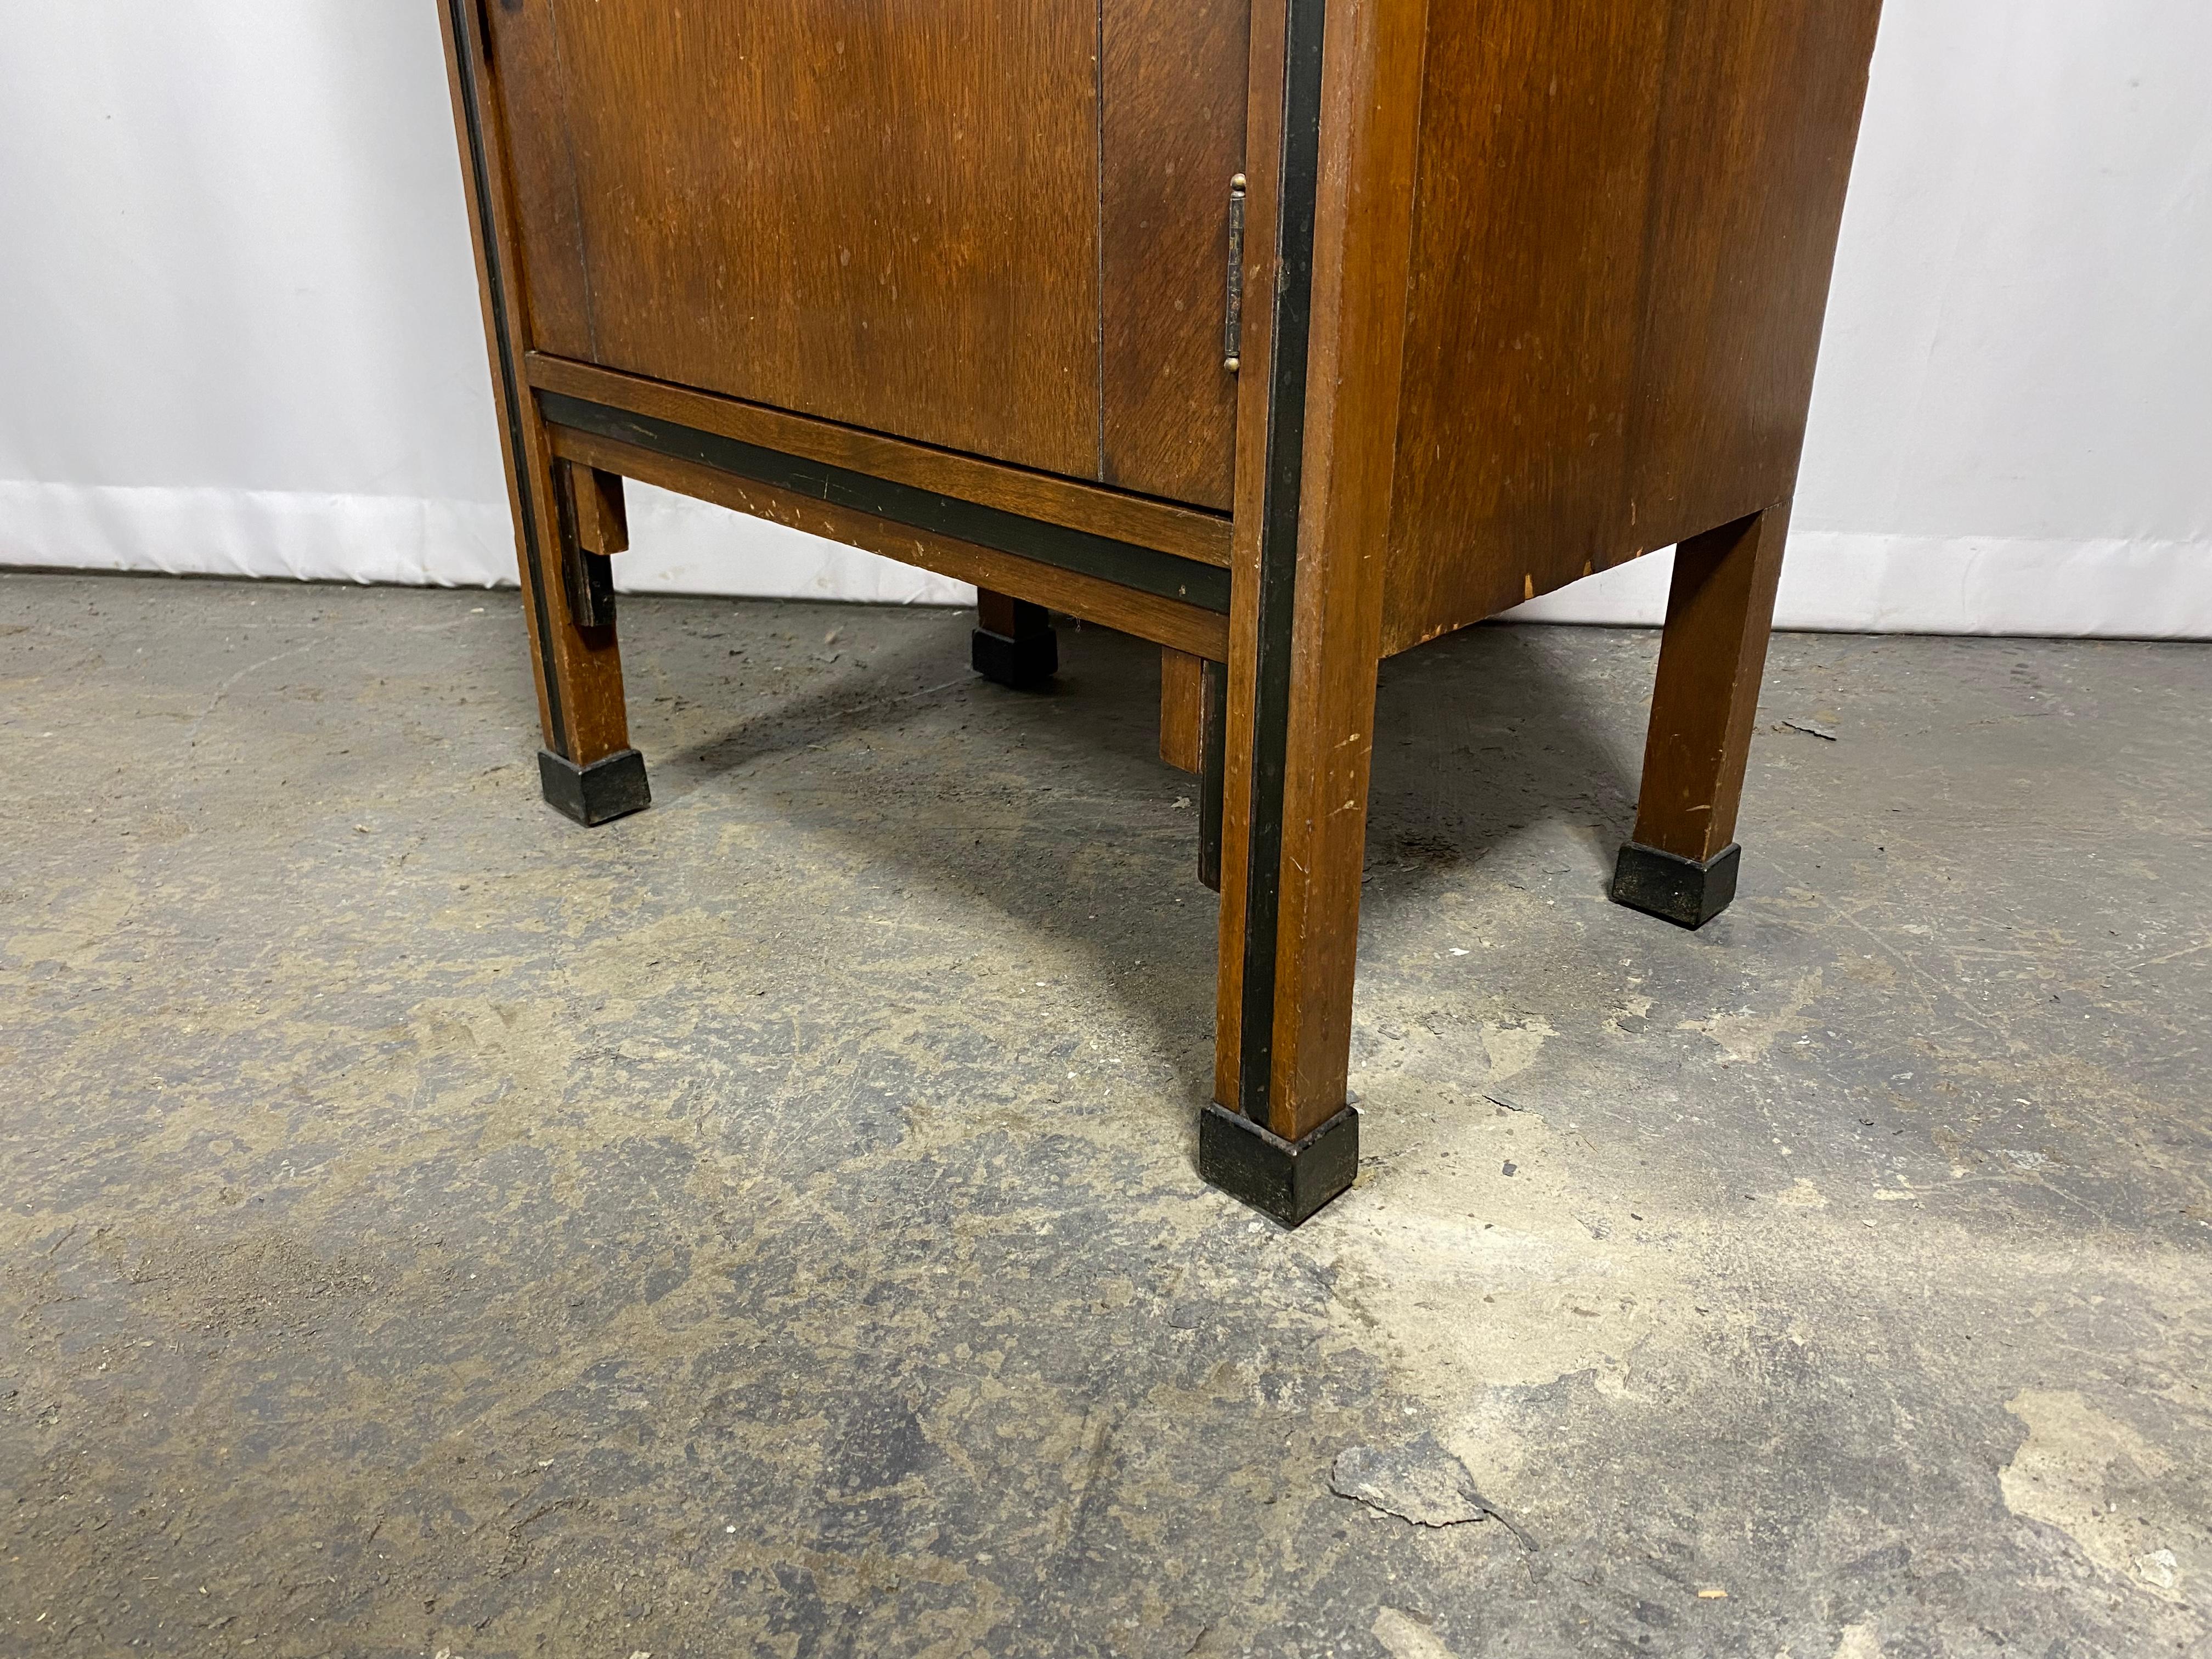 American Elegant Art Deco Dental cabinet, walnut and glass, manufactured by ENOCHS For Sale